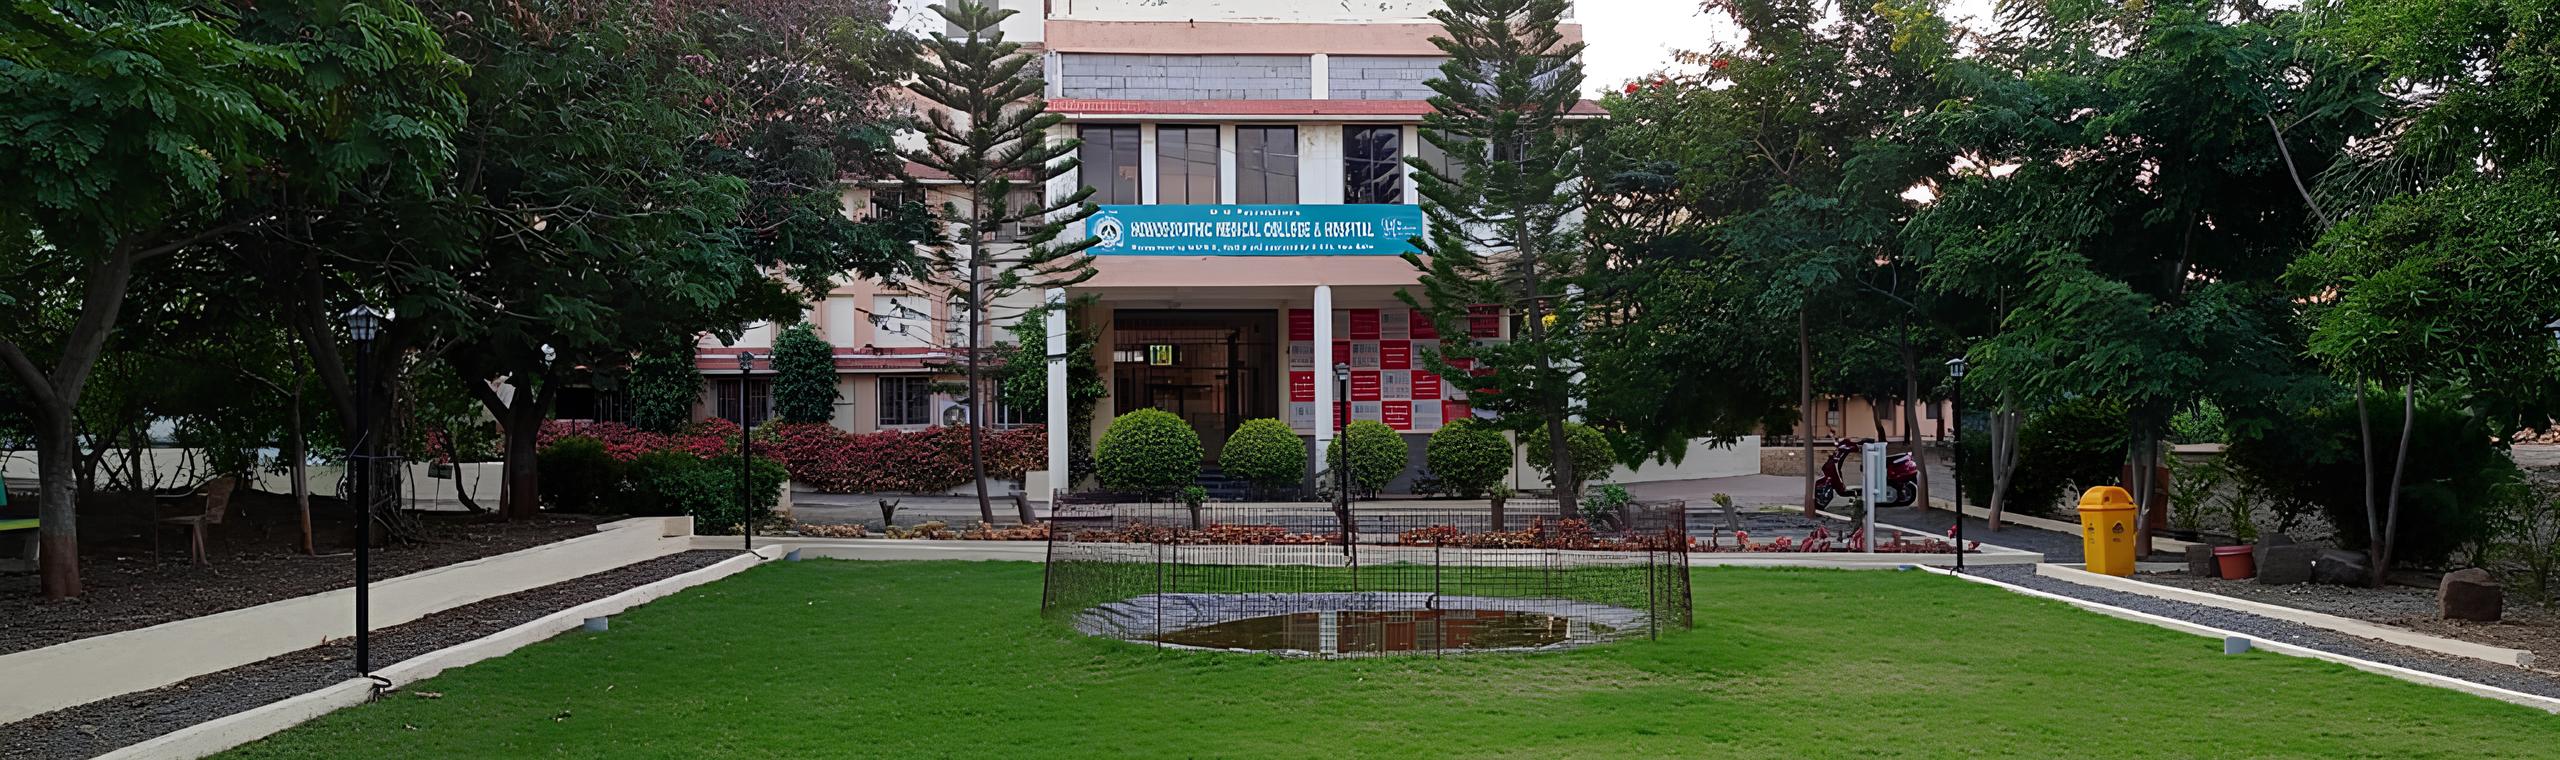 MHF Homoeopathic Medical College Ahmednagar Admission, Courses, Eligibility, Fees, Facilities